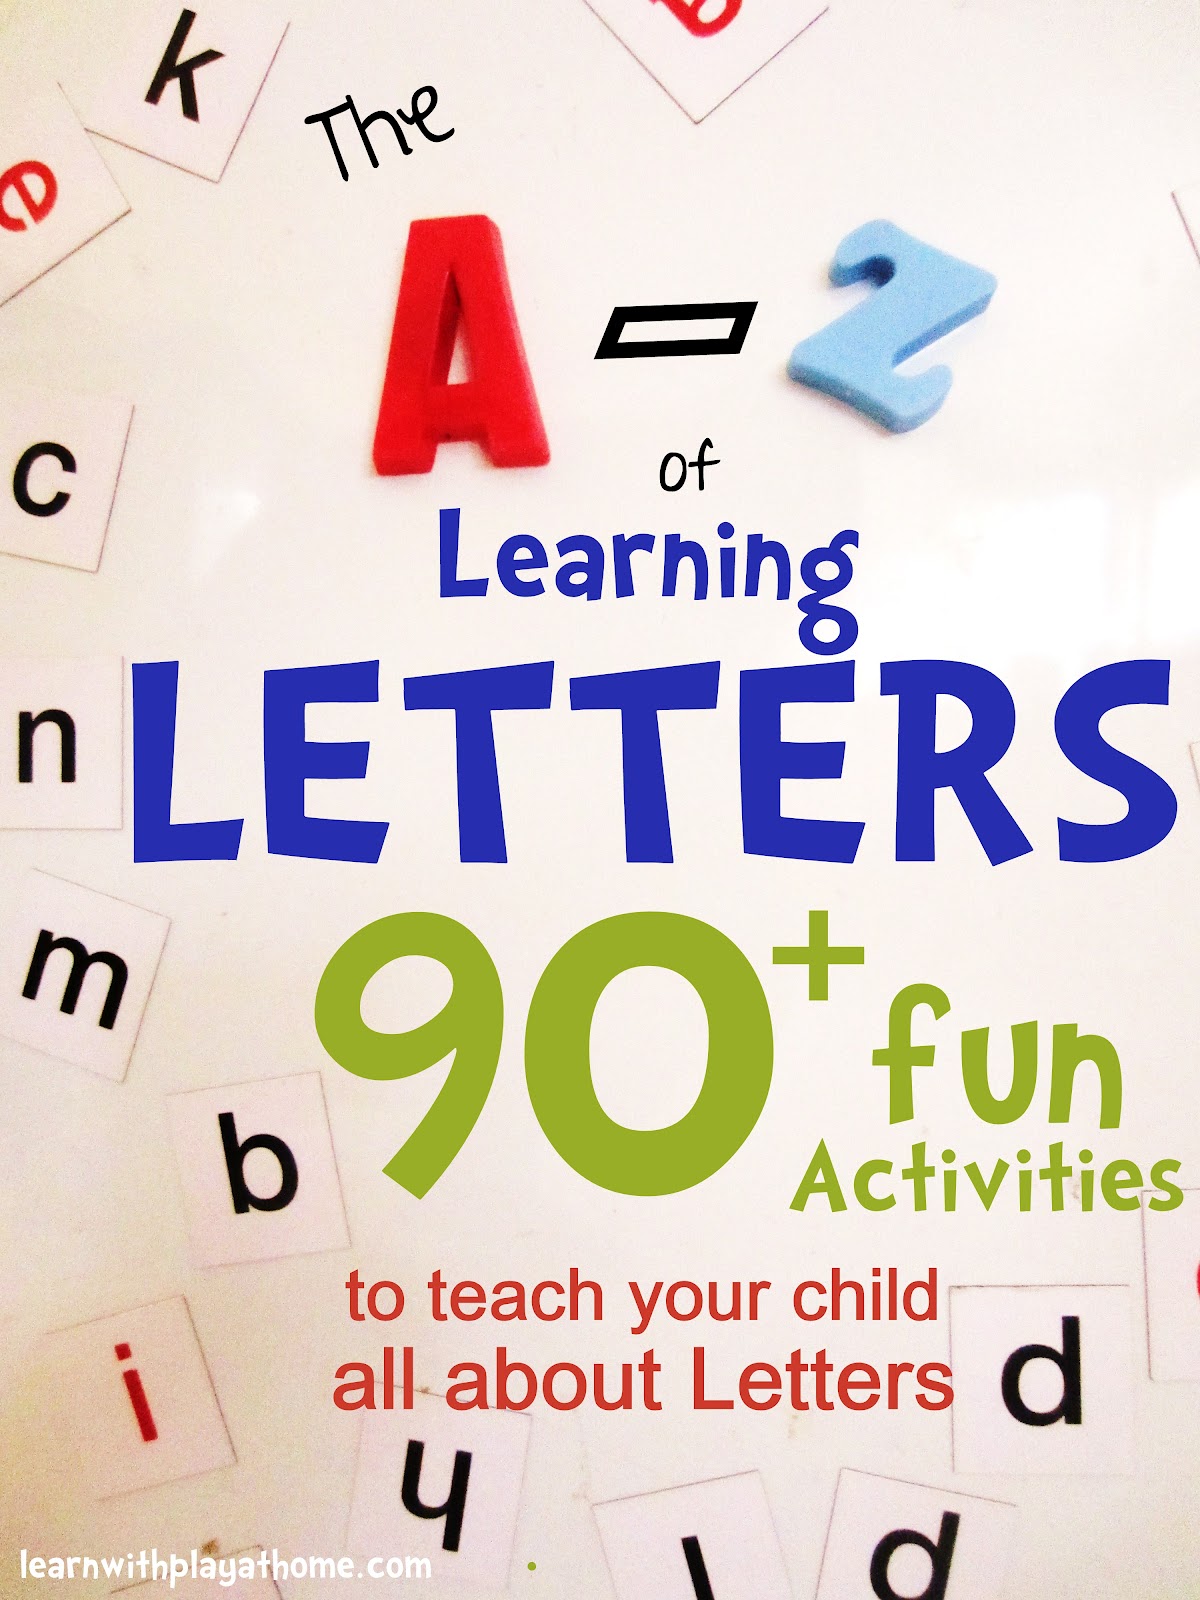 Learn with Play at Home: The A-Z of Learning Letters. 90+ ways to ...